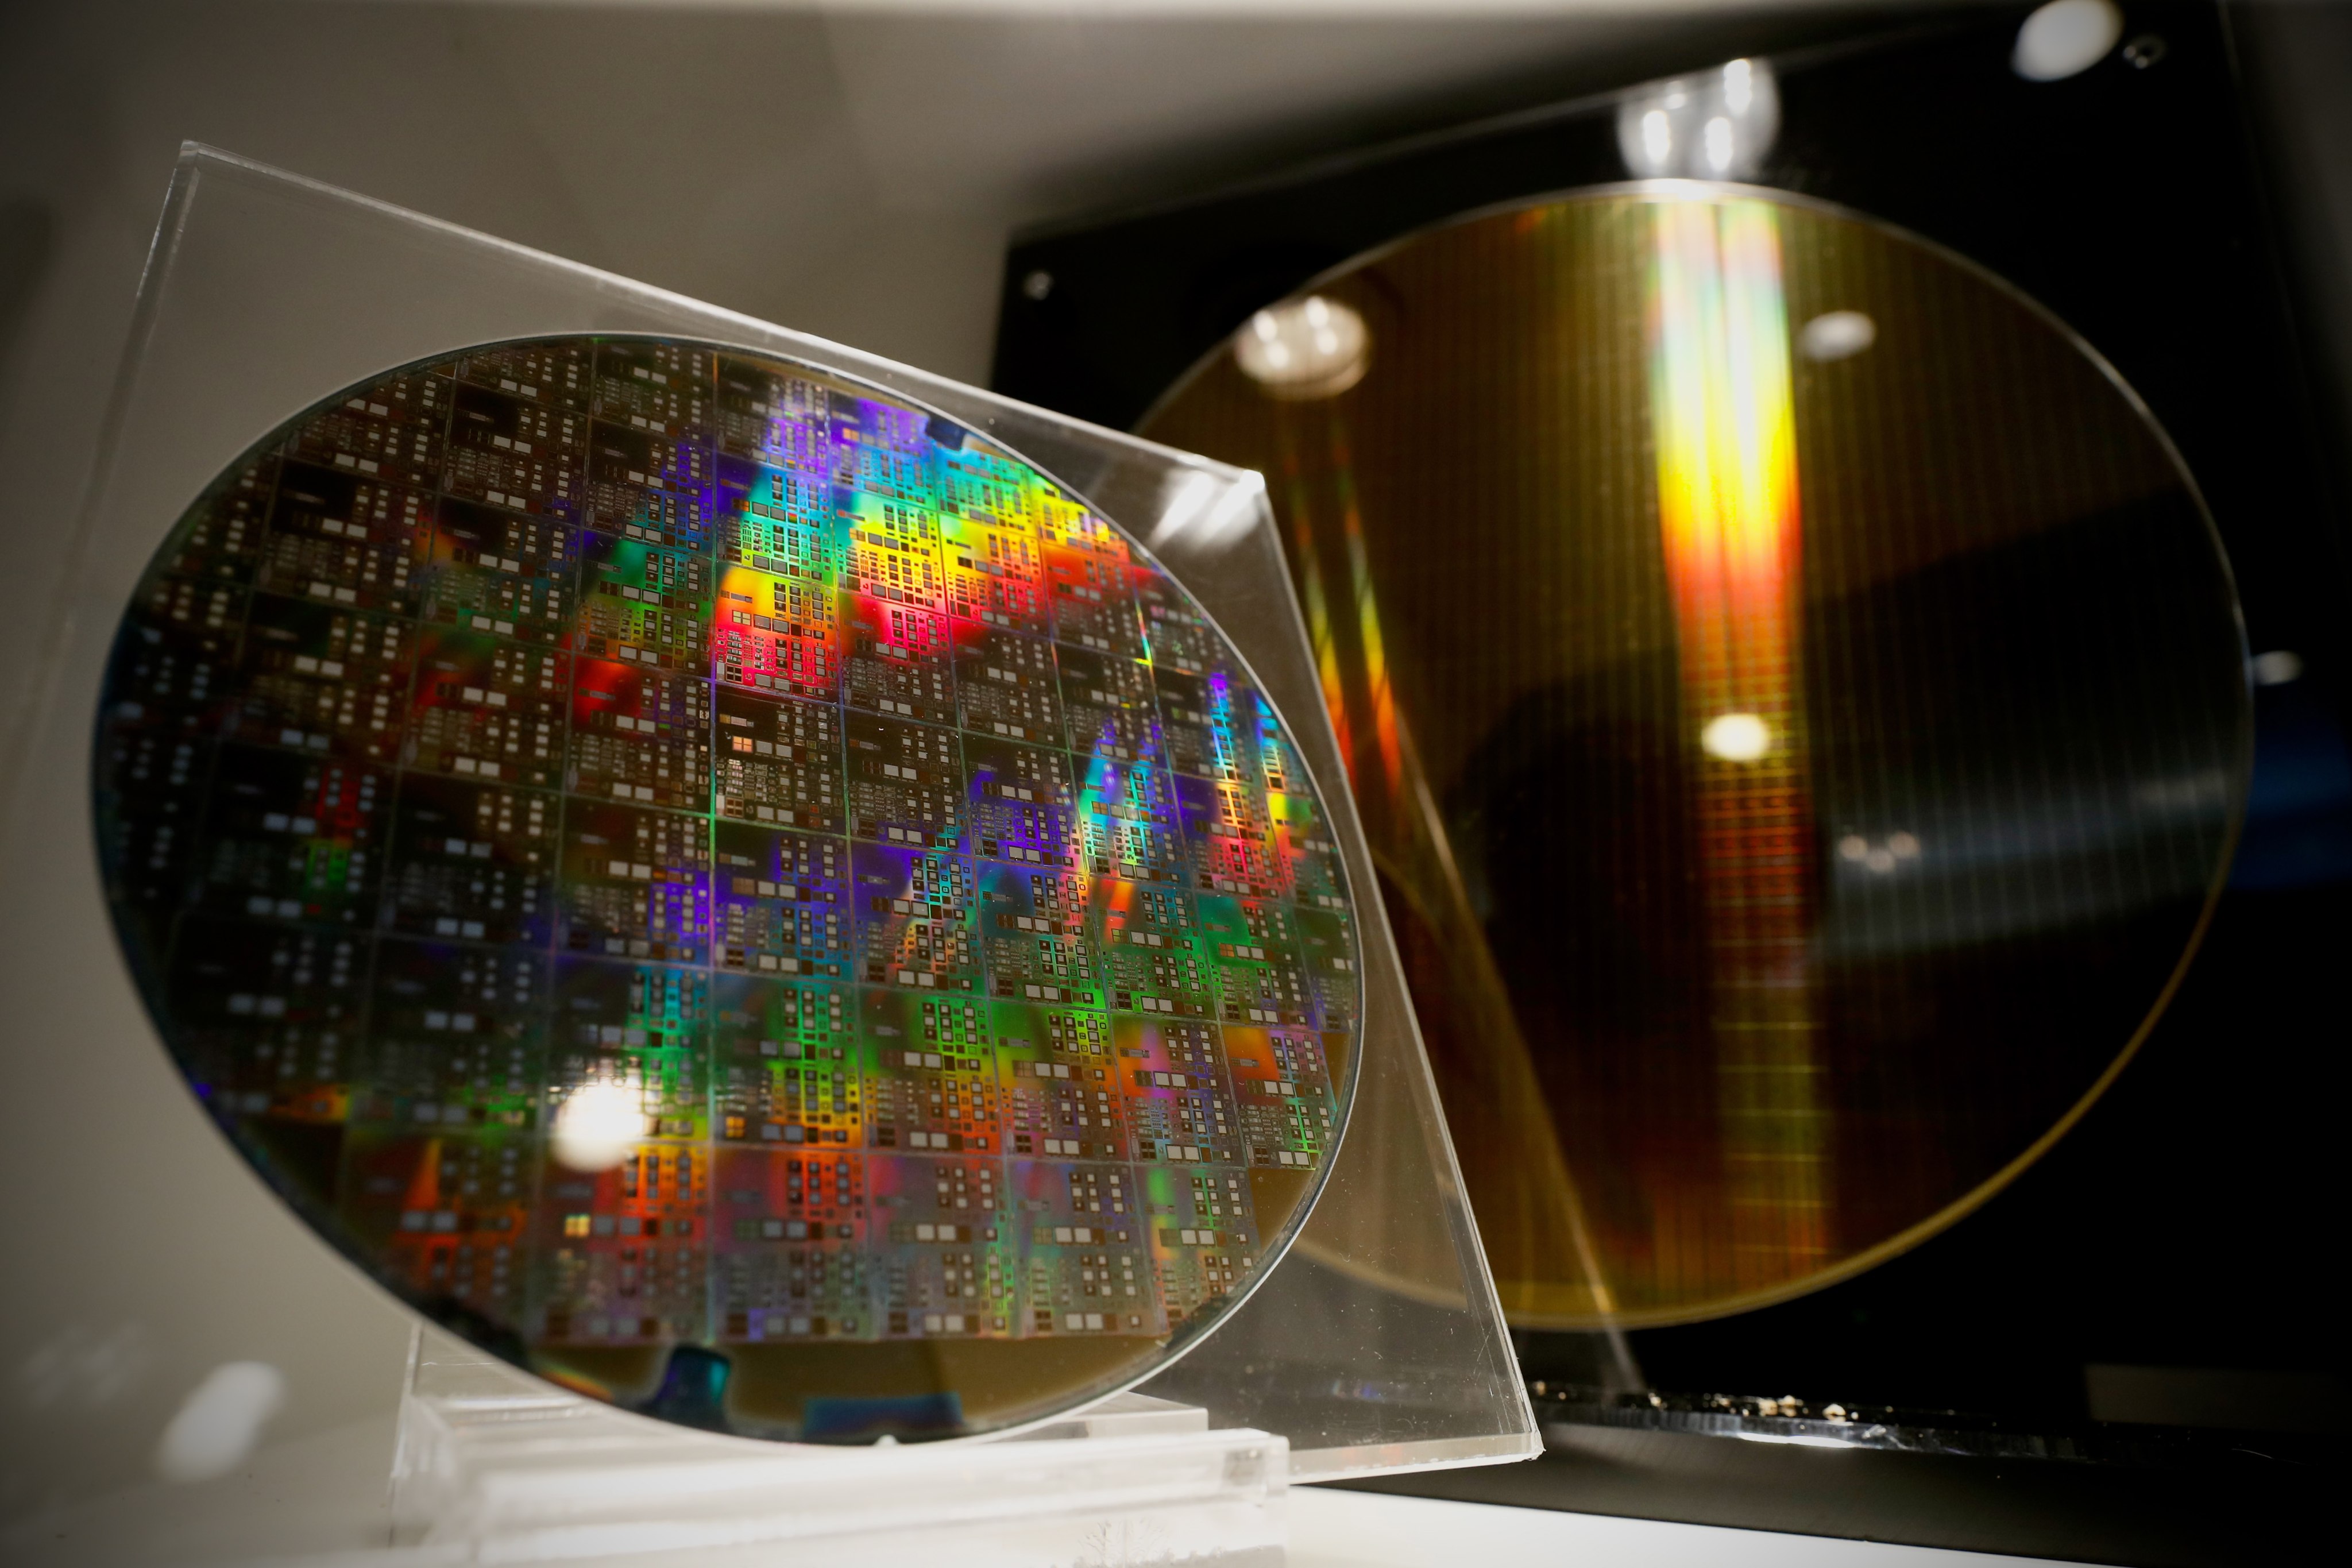 Silicon wafer semiconductors on display at a science park in Hsinchu county, Taiwan, on September 16, 2022. Photo: EPA-EFE